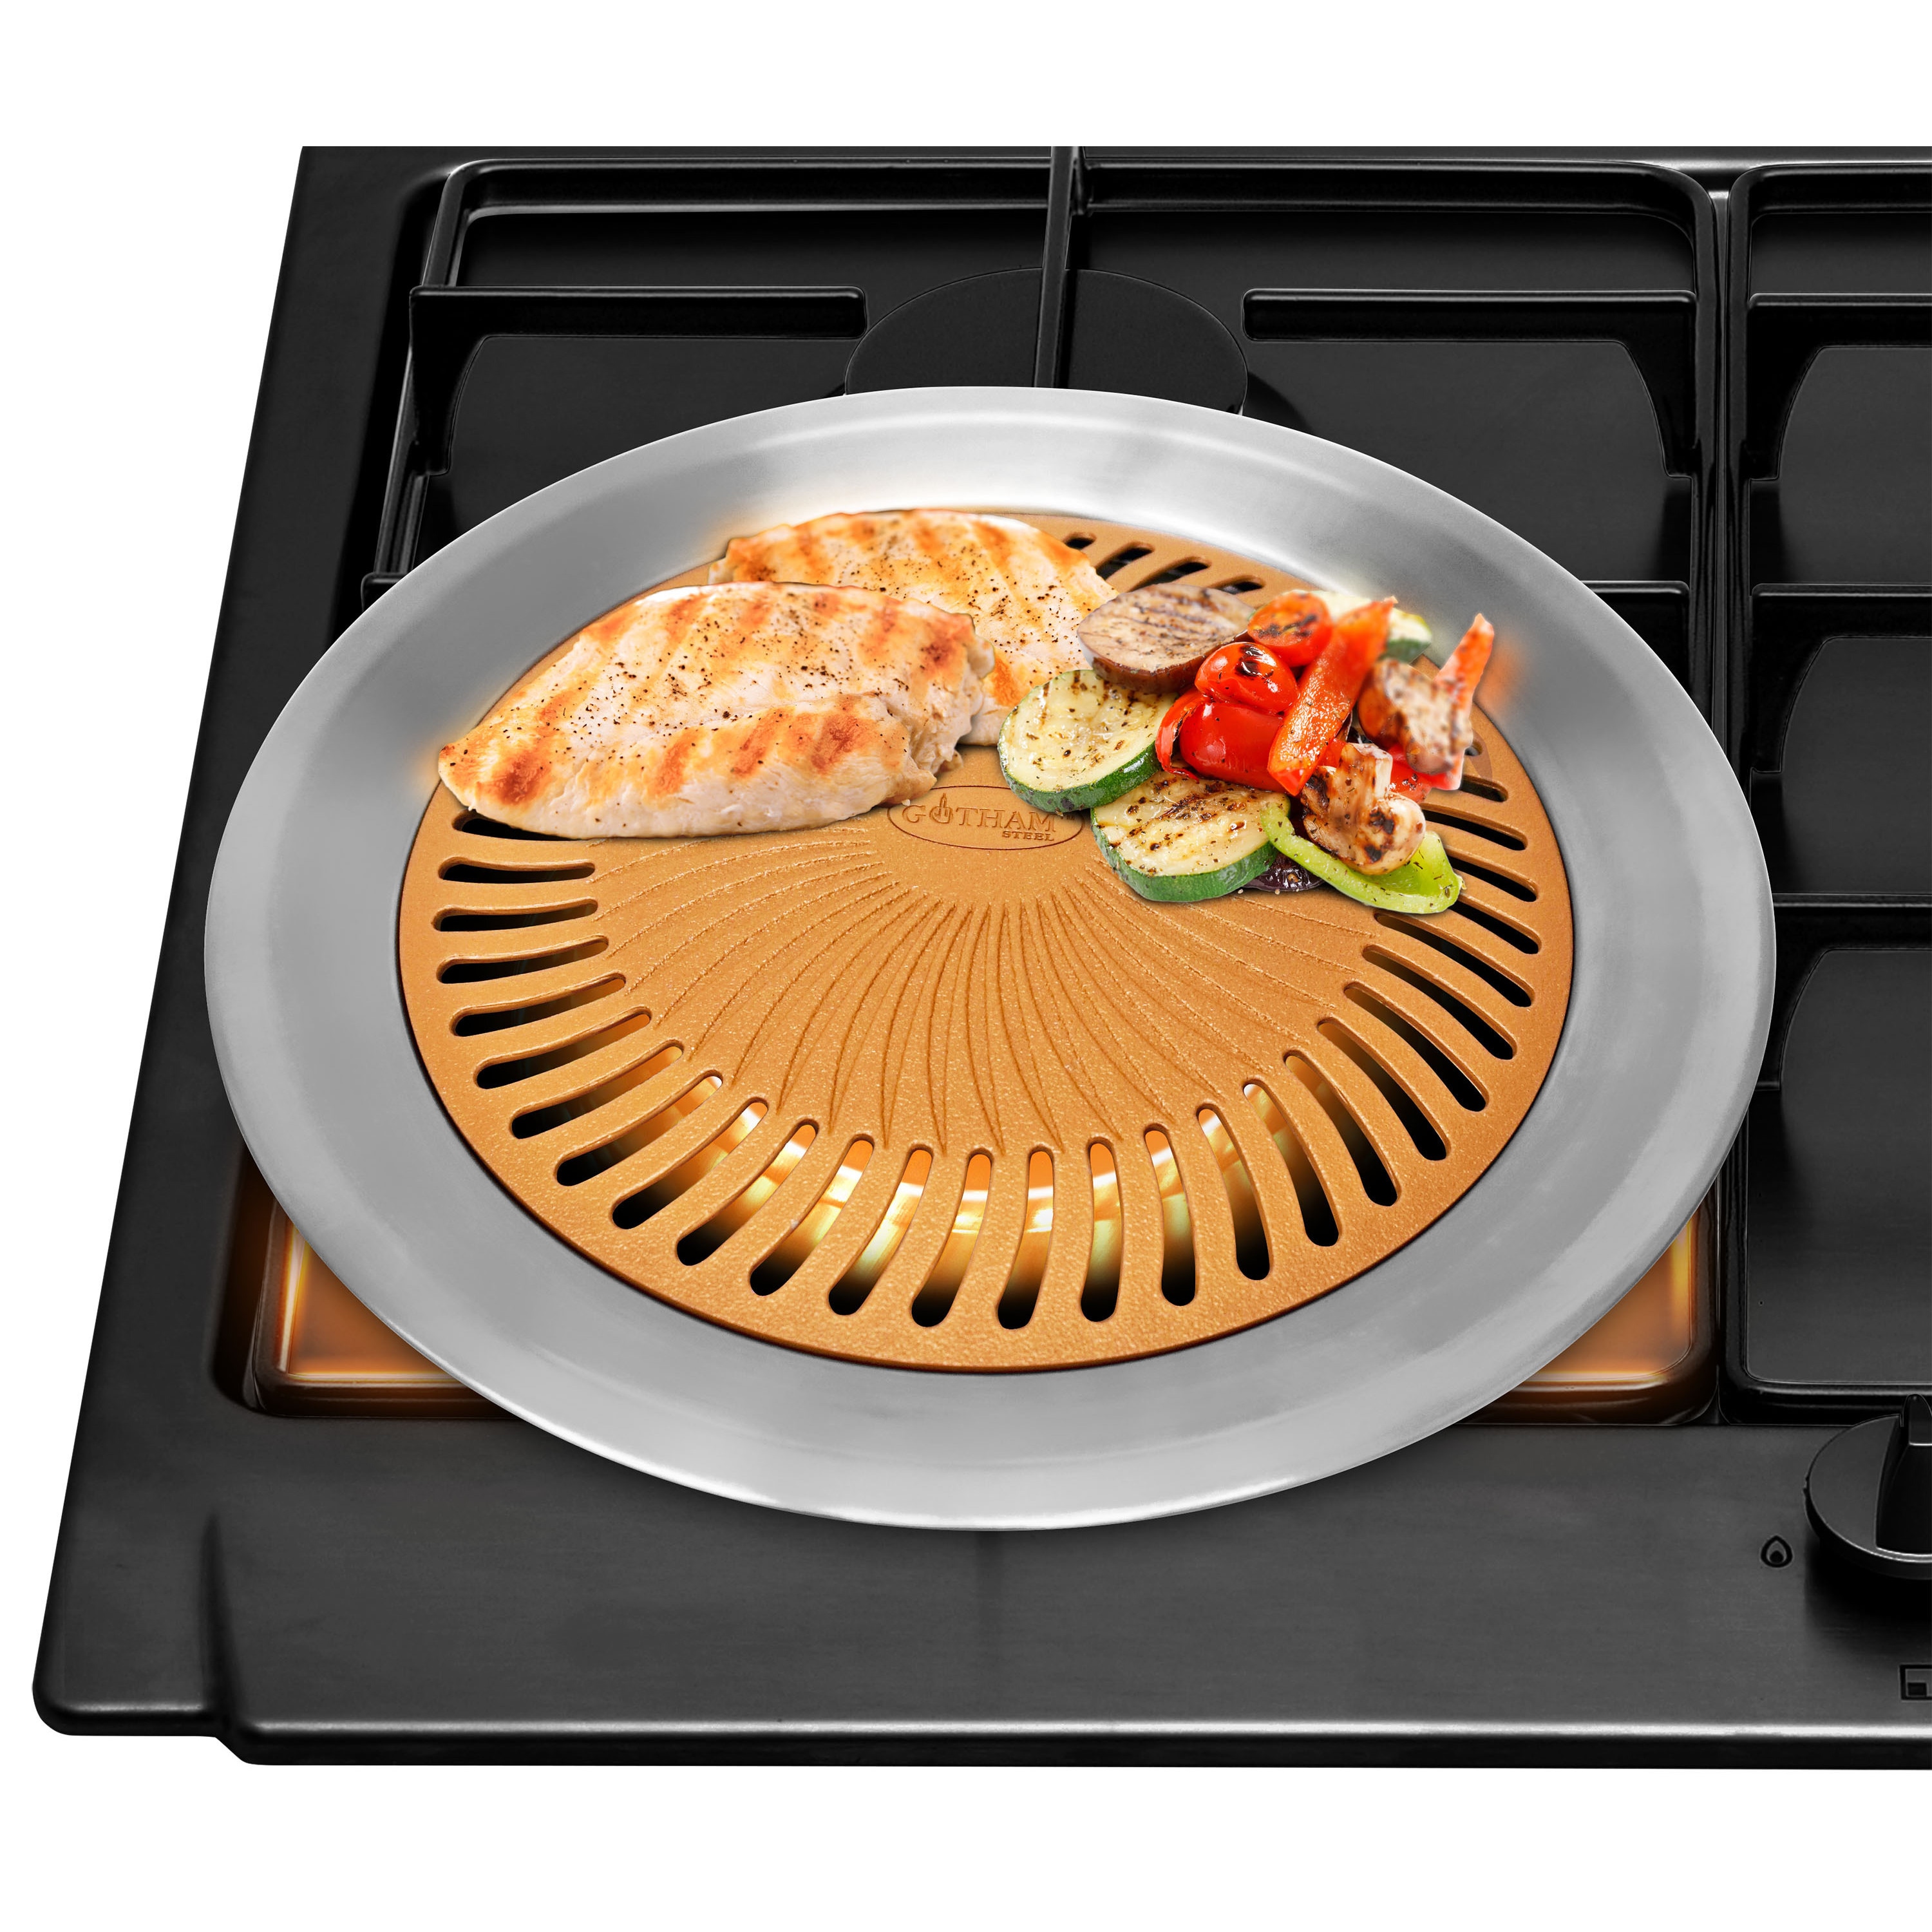 Shop Gotham Steel Ti Cerama Non Stick Stove Top Indoor Grill Overstock 15891164,How Long To Cook Meatloaf At 325